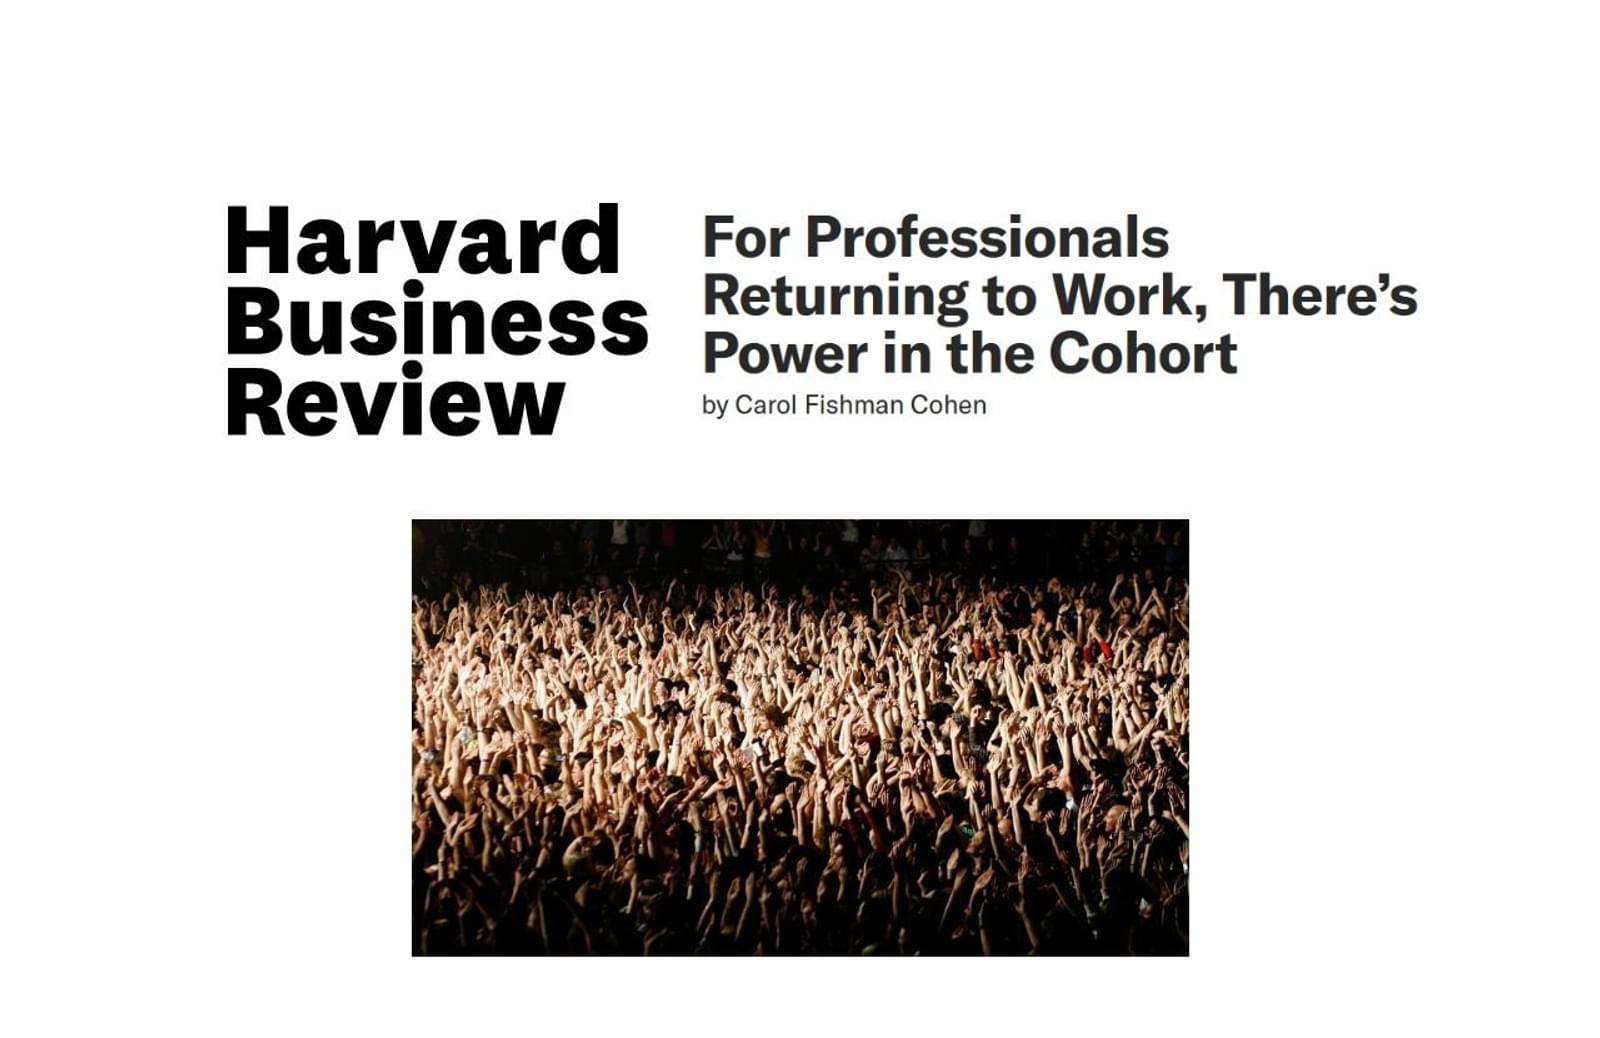 Hbr theres power in the cohort news thumbnail